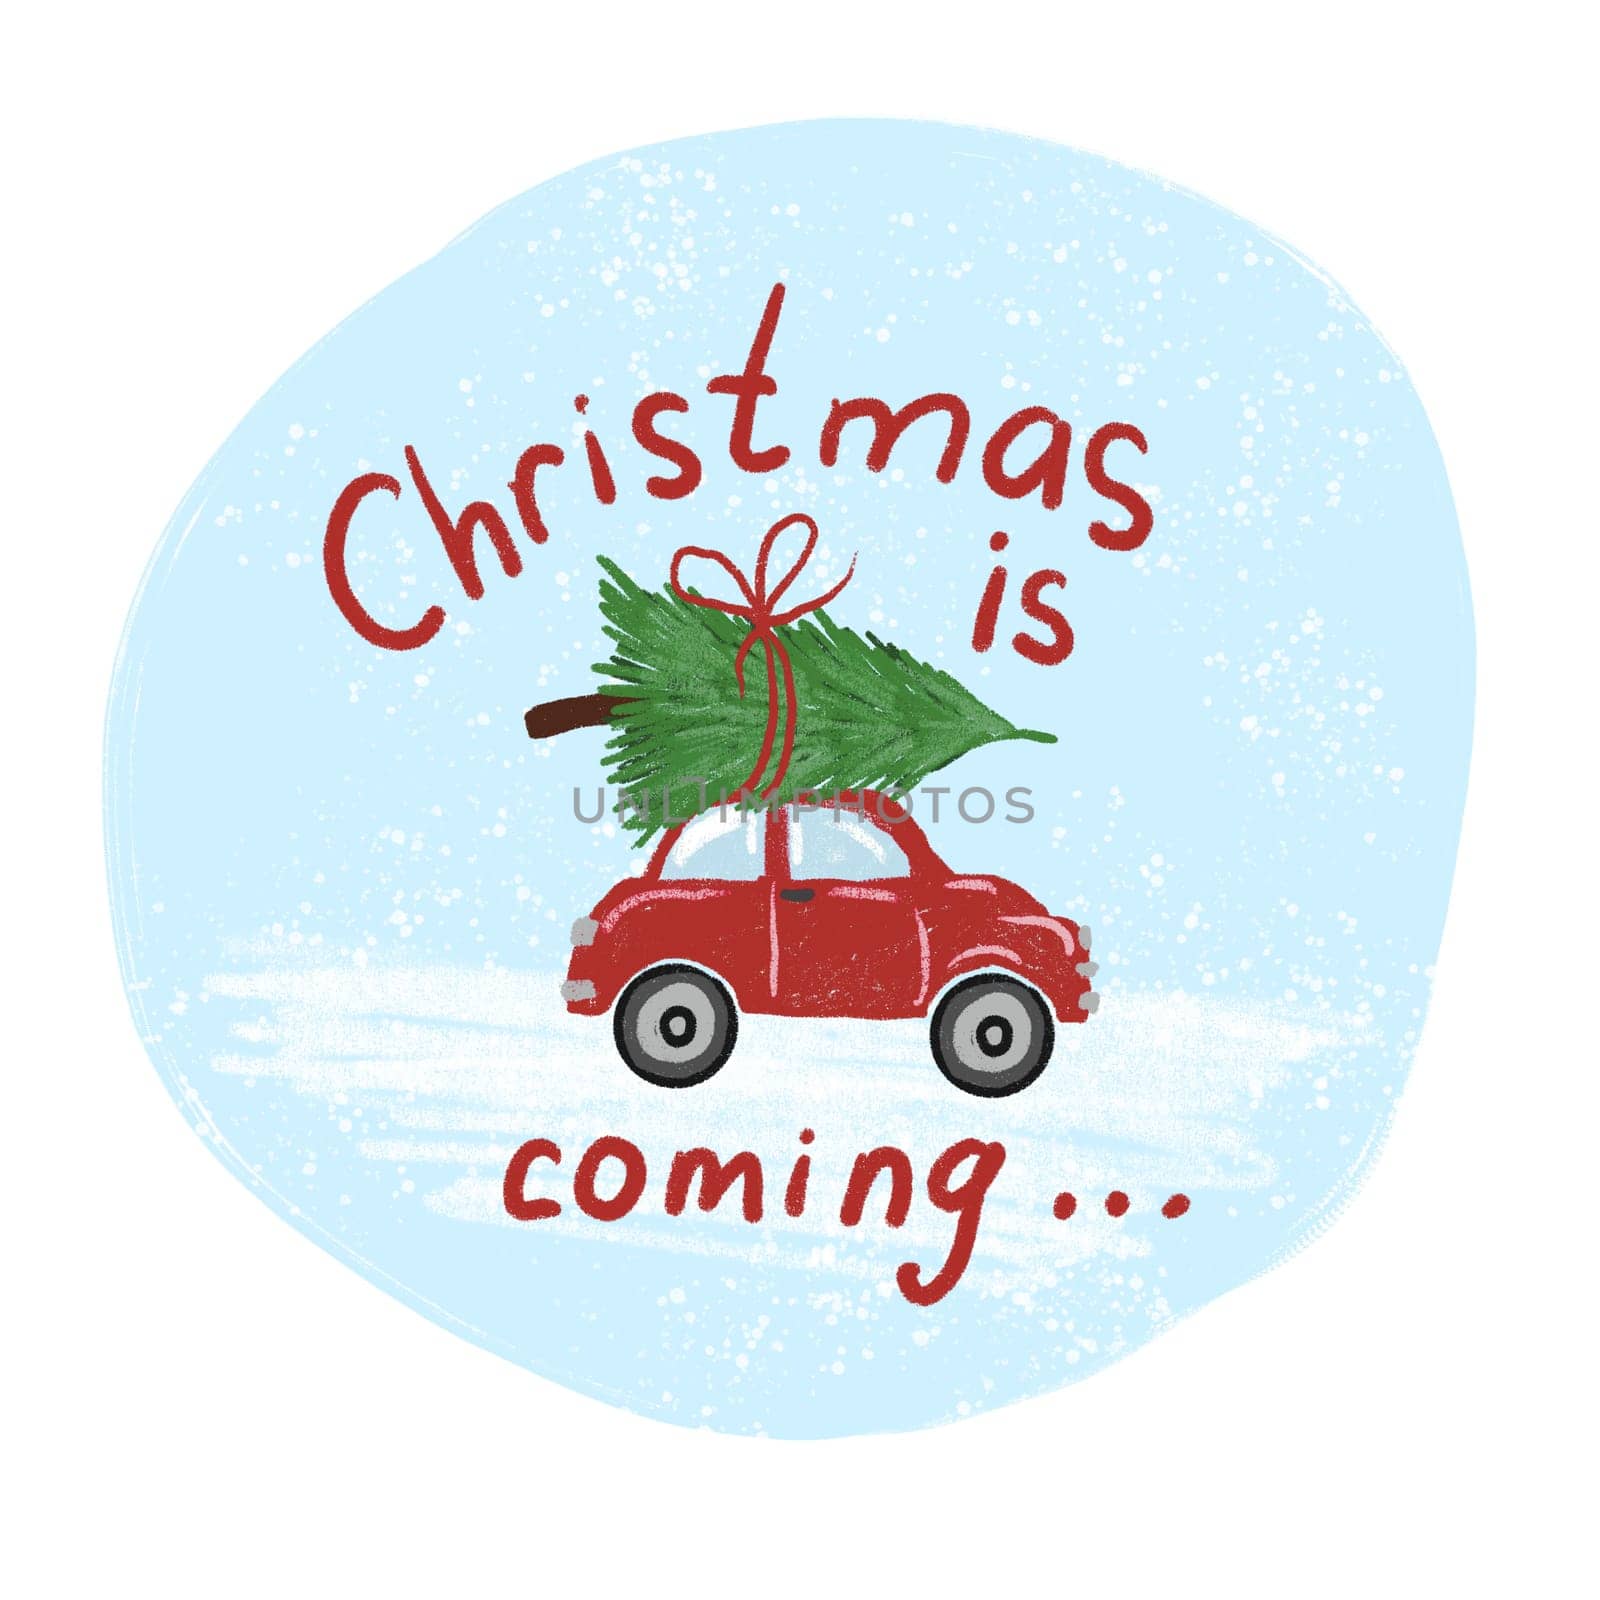 Hand drawn illustration of winter car with pine fir tree. Christmas is coming slogan greeting, festive holiday card poster, retro vintage print, cute red green art with blue snow snowflakes